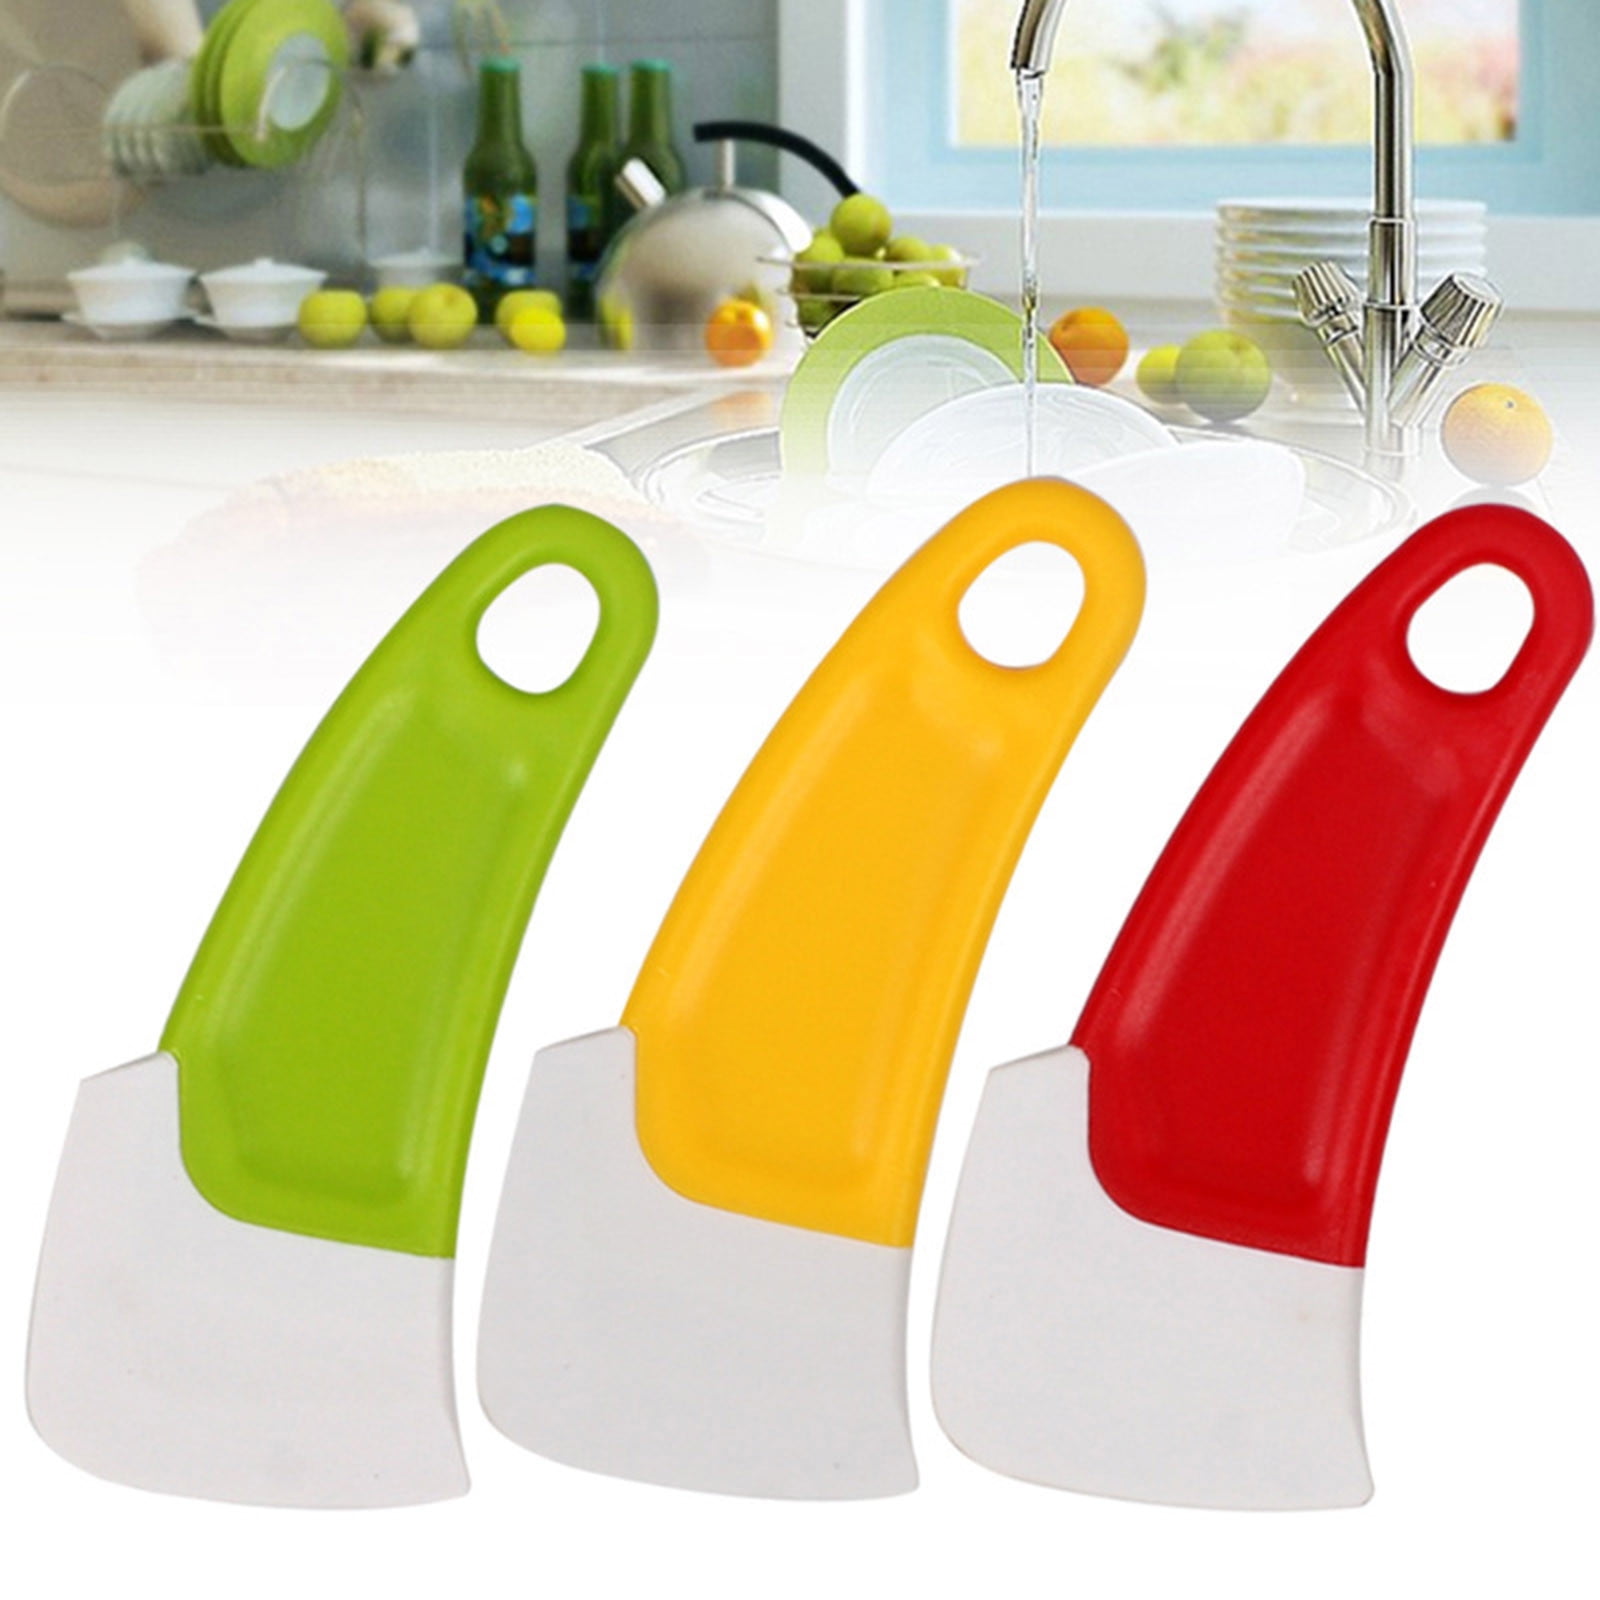 AIEOTT Household Pots Pans Dishes Grease Heat Resistant Cleaning Flexible  Thicker Scraper Clean Spatula Plastic Pan Scraper Tools For Iron Skillets  Cookware Pan Dishes 